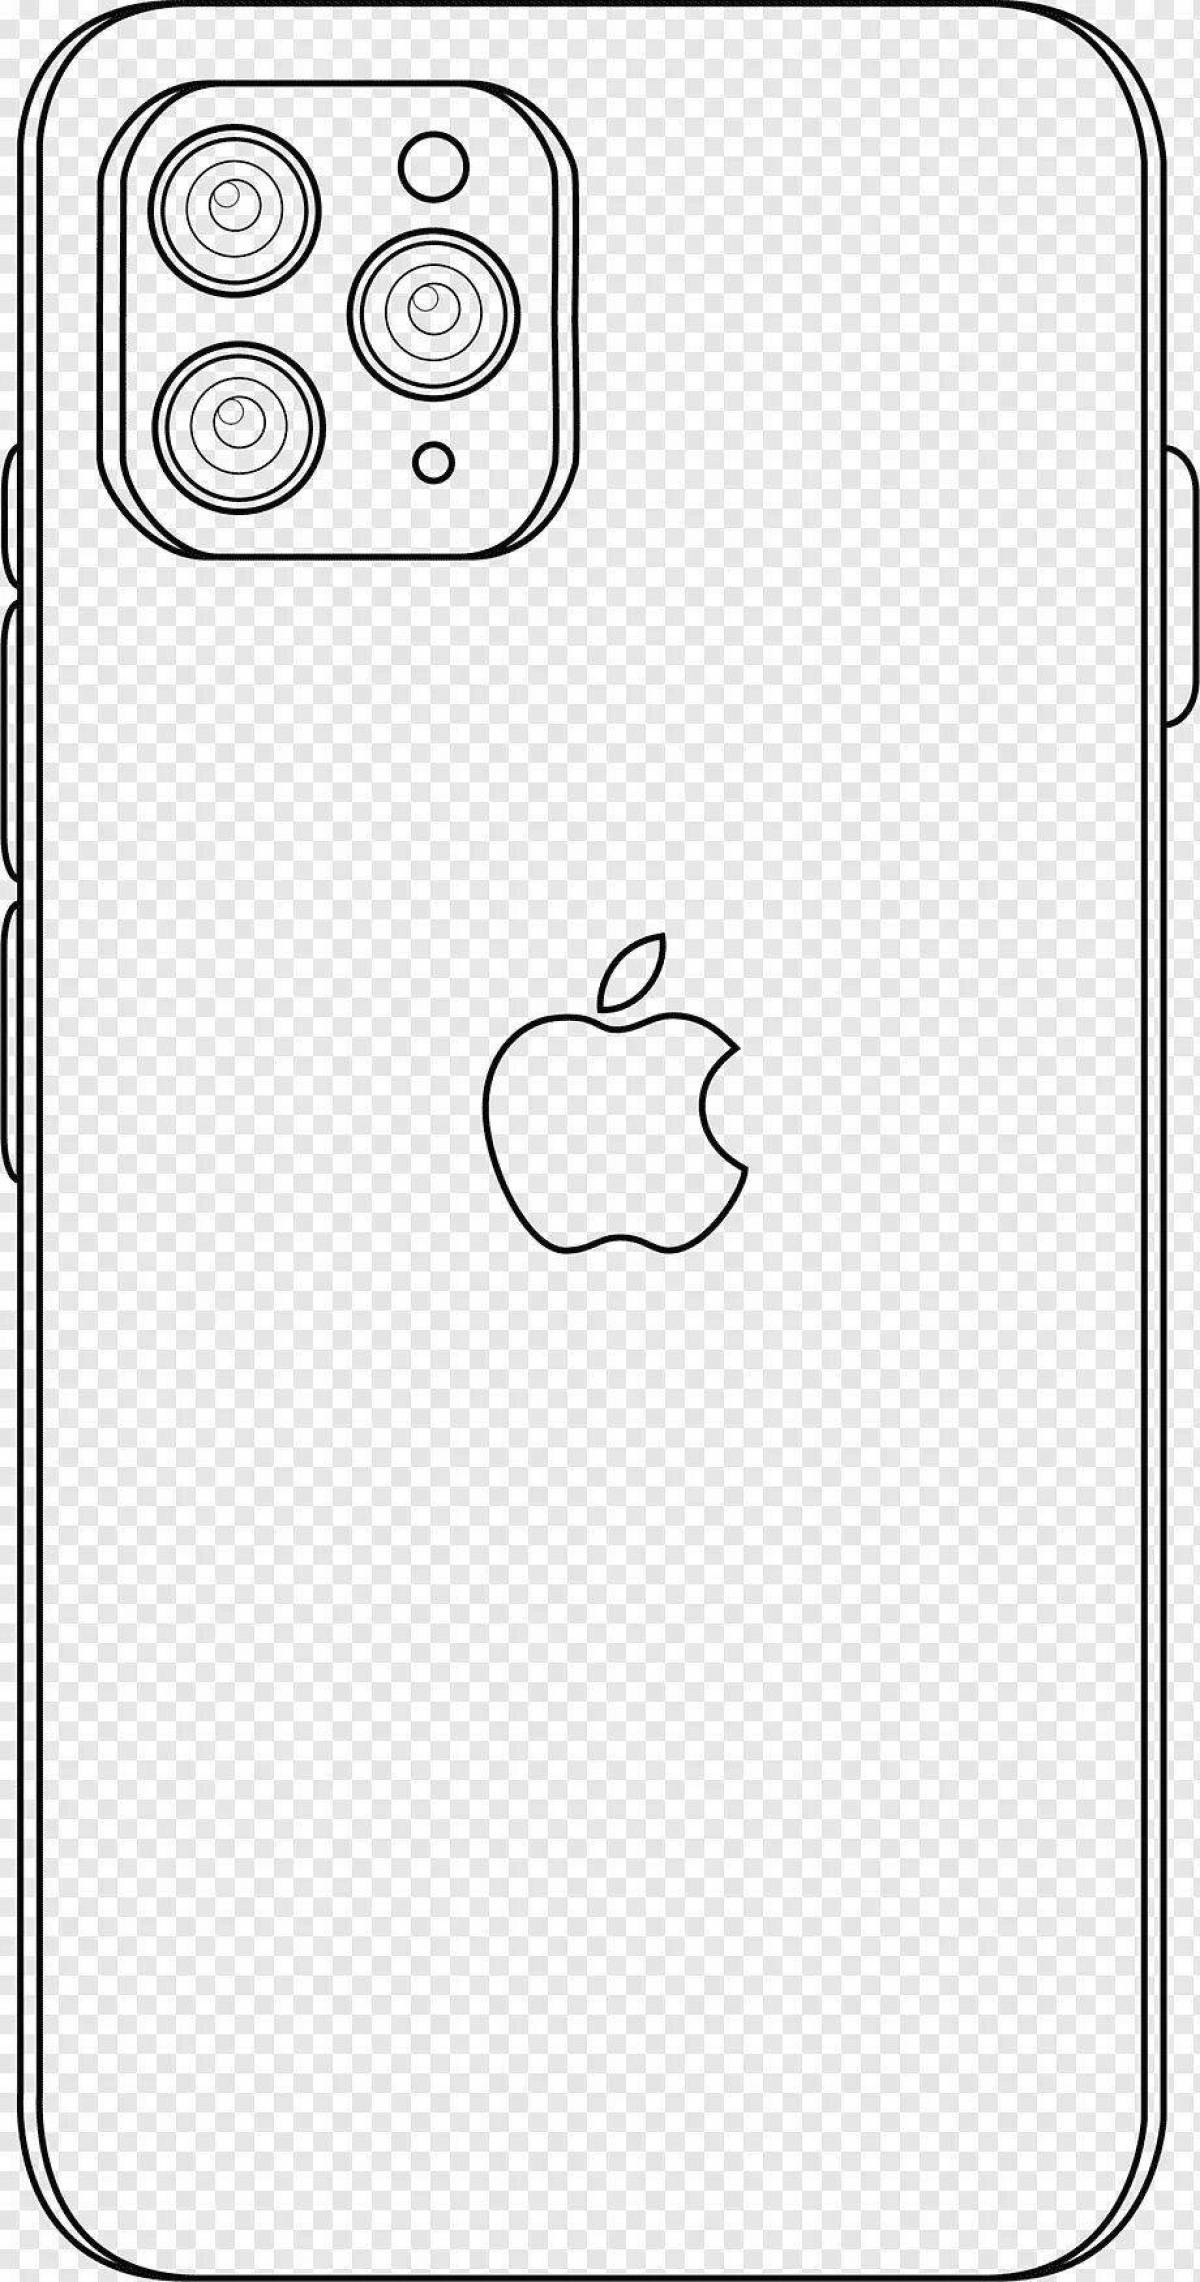 Fairytale coloring page iphone apple